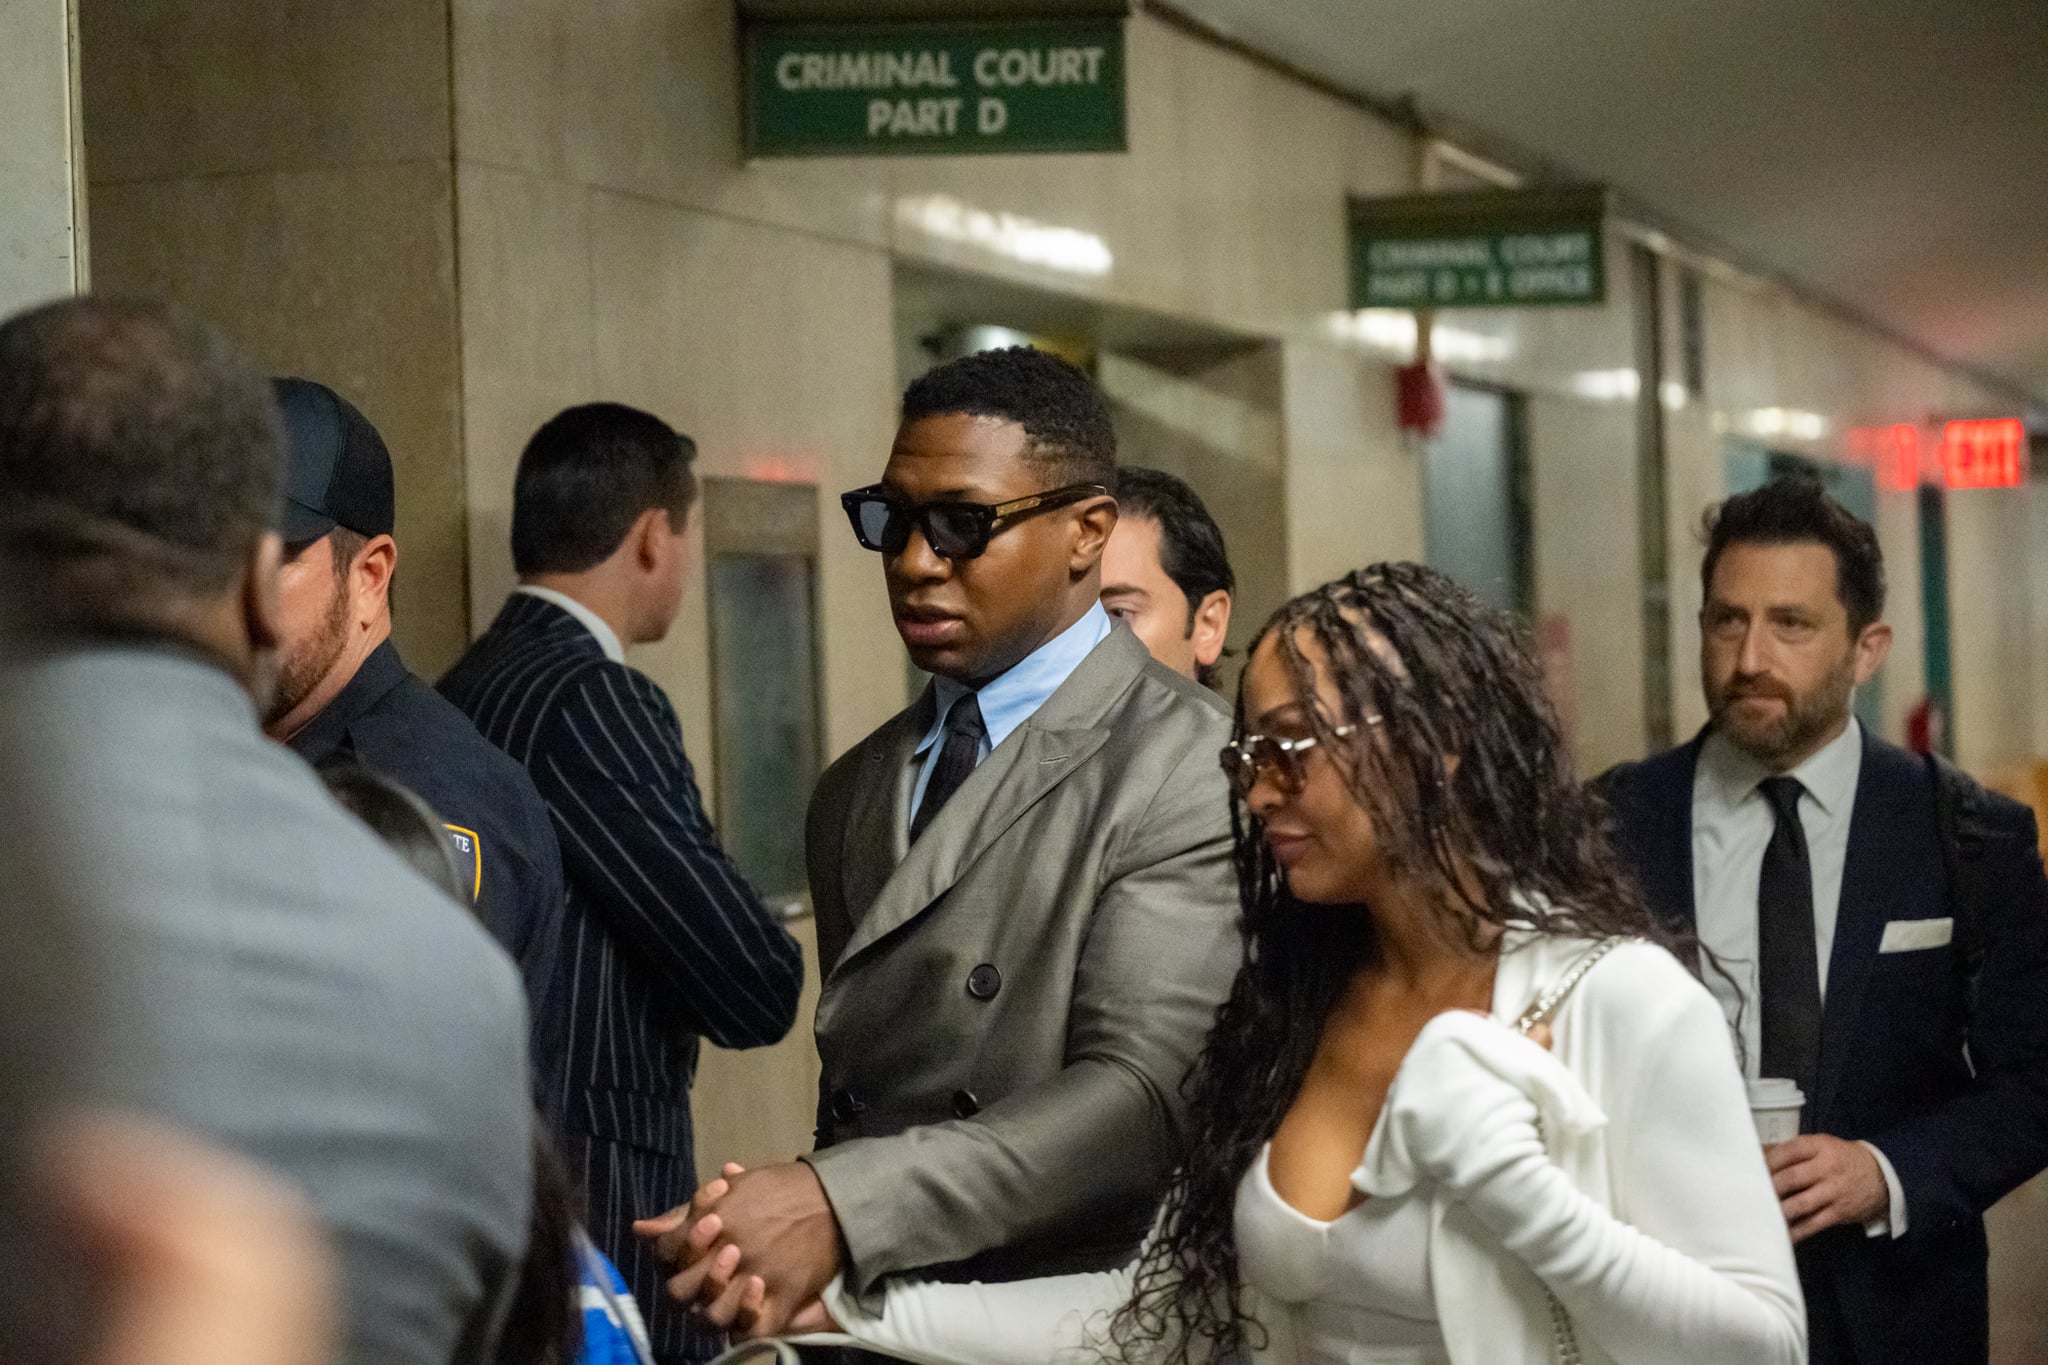 NEW YORK, NEW YORK - AUGUST 03: Actor Jonathan Majors, and his girlfriend, Meagan Good, arrive to Manhattan Criminal Court for his pre-trial hearing on August 03, 2023 in New York City. If convicted, Majors could face up to a year in jail over misdemeanour charges of assault and harassment. (Photo by Alexi Rosenfeld/Getty Images)